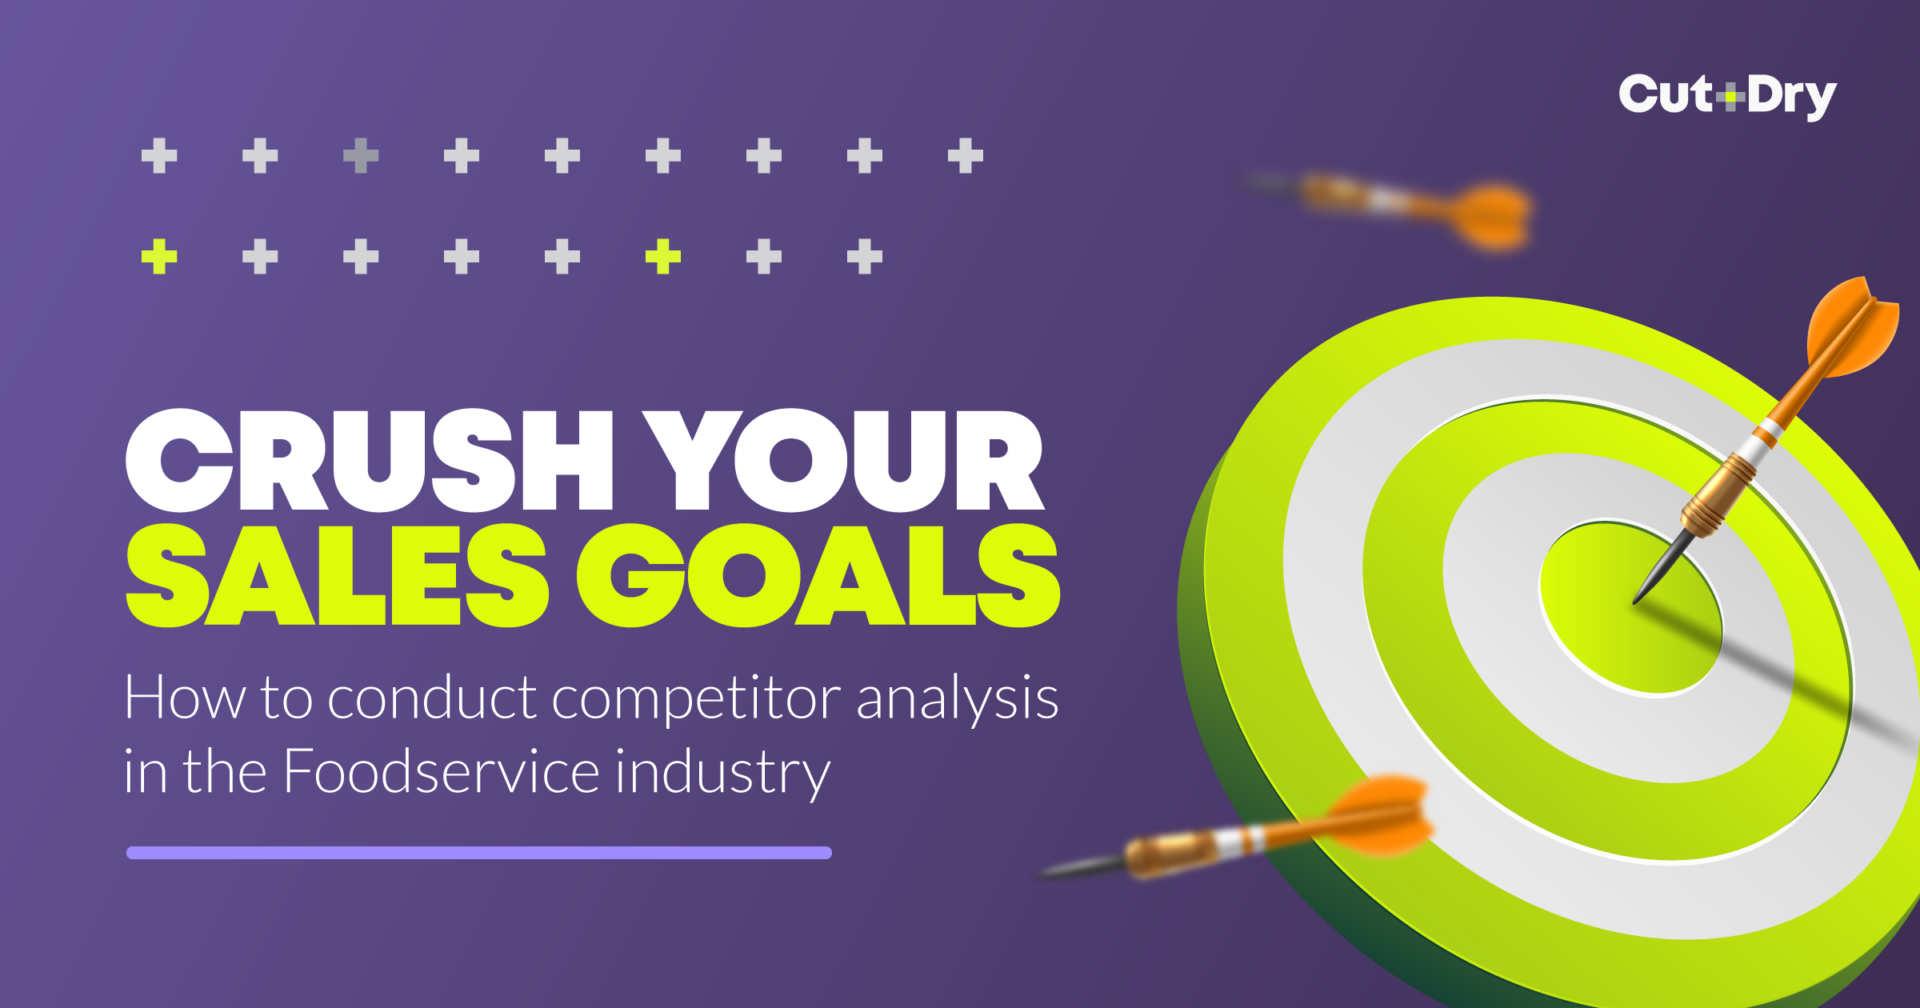 Crush your sales goals: How to conduct competitor analysis in the Foodservice industry